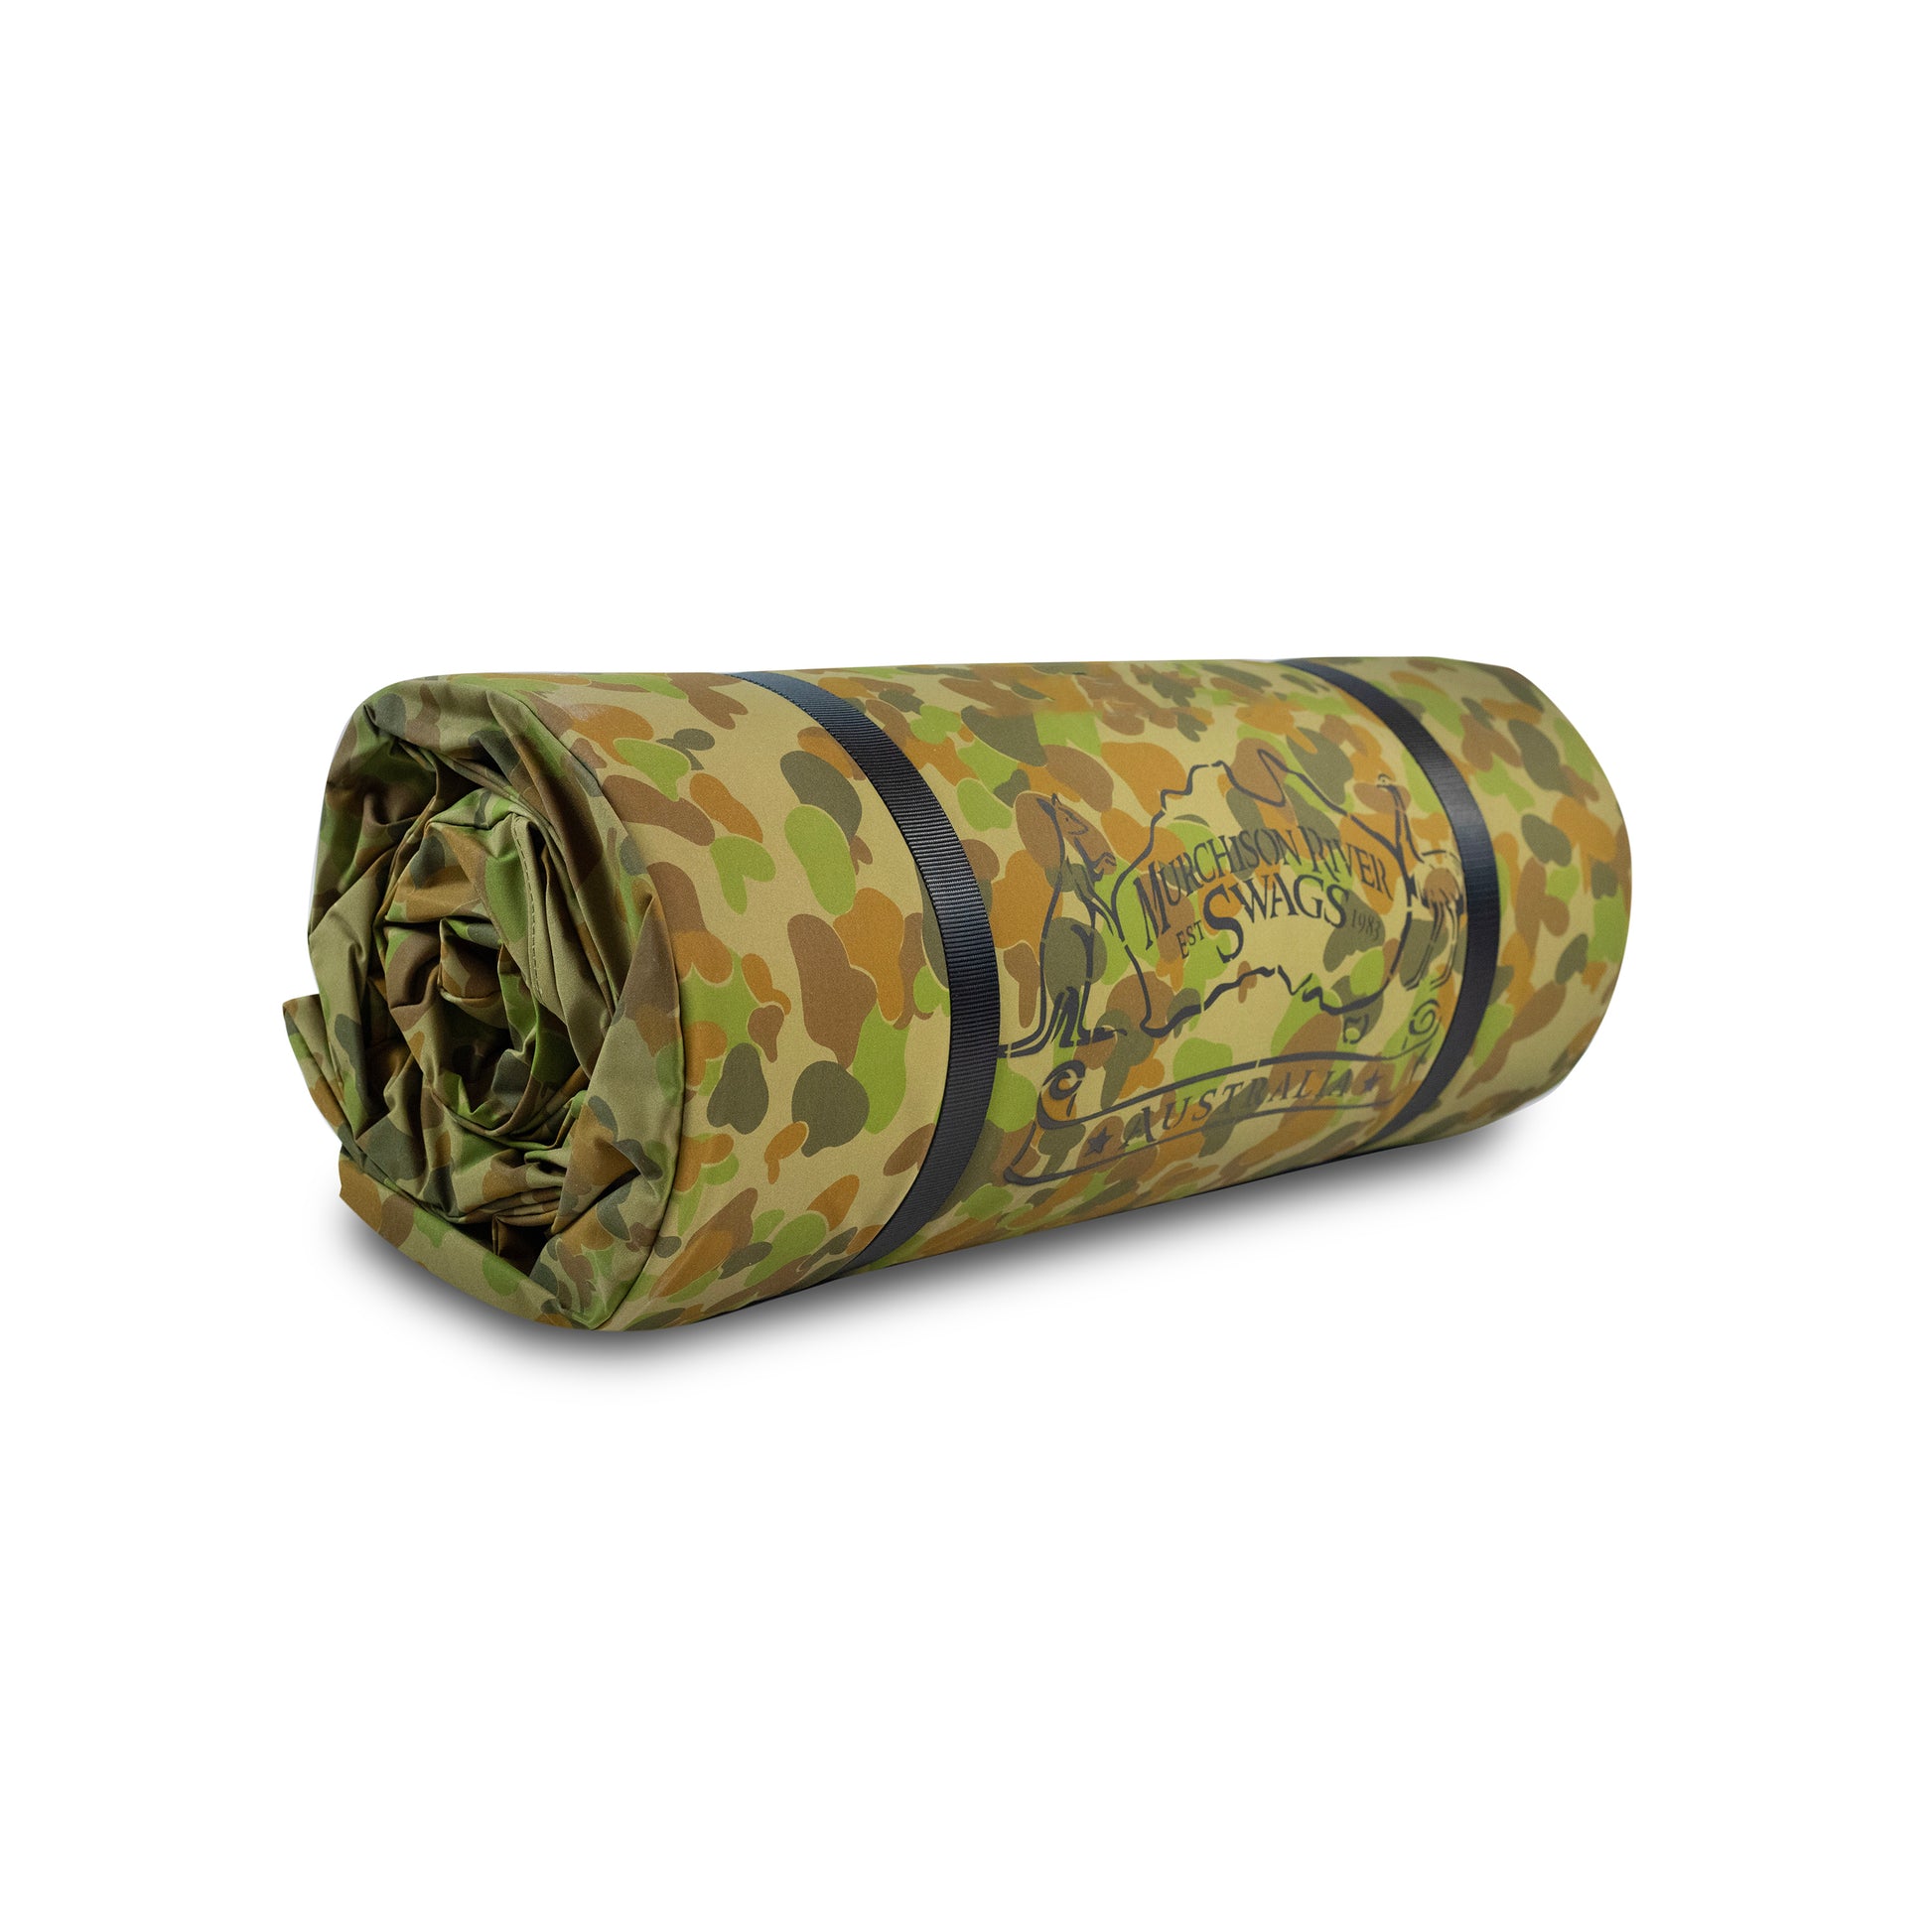 Camo Canvas Swag Rolled Up.